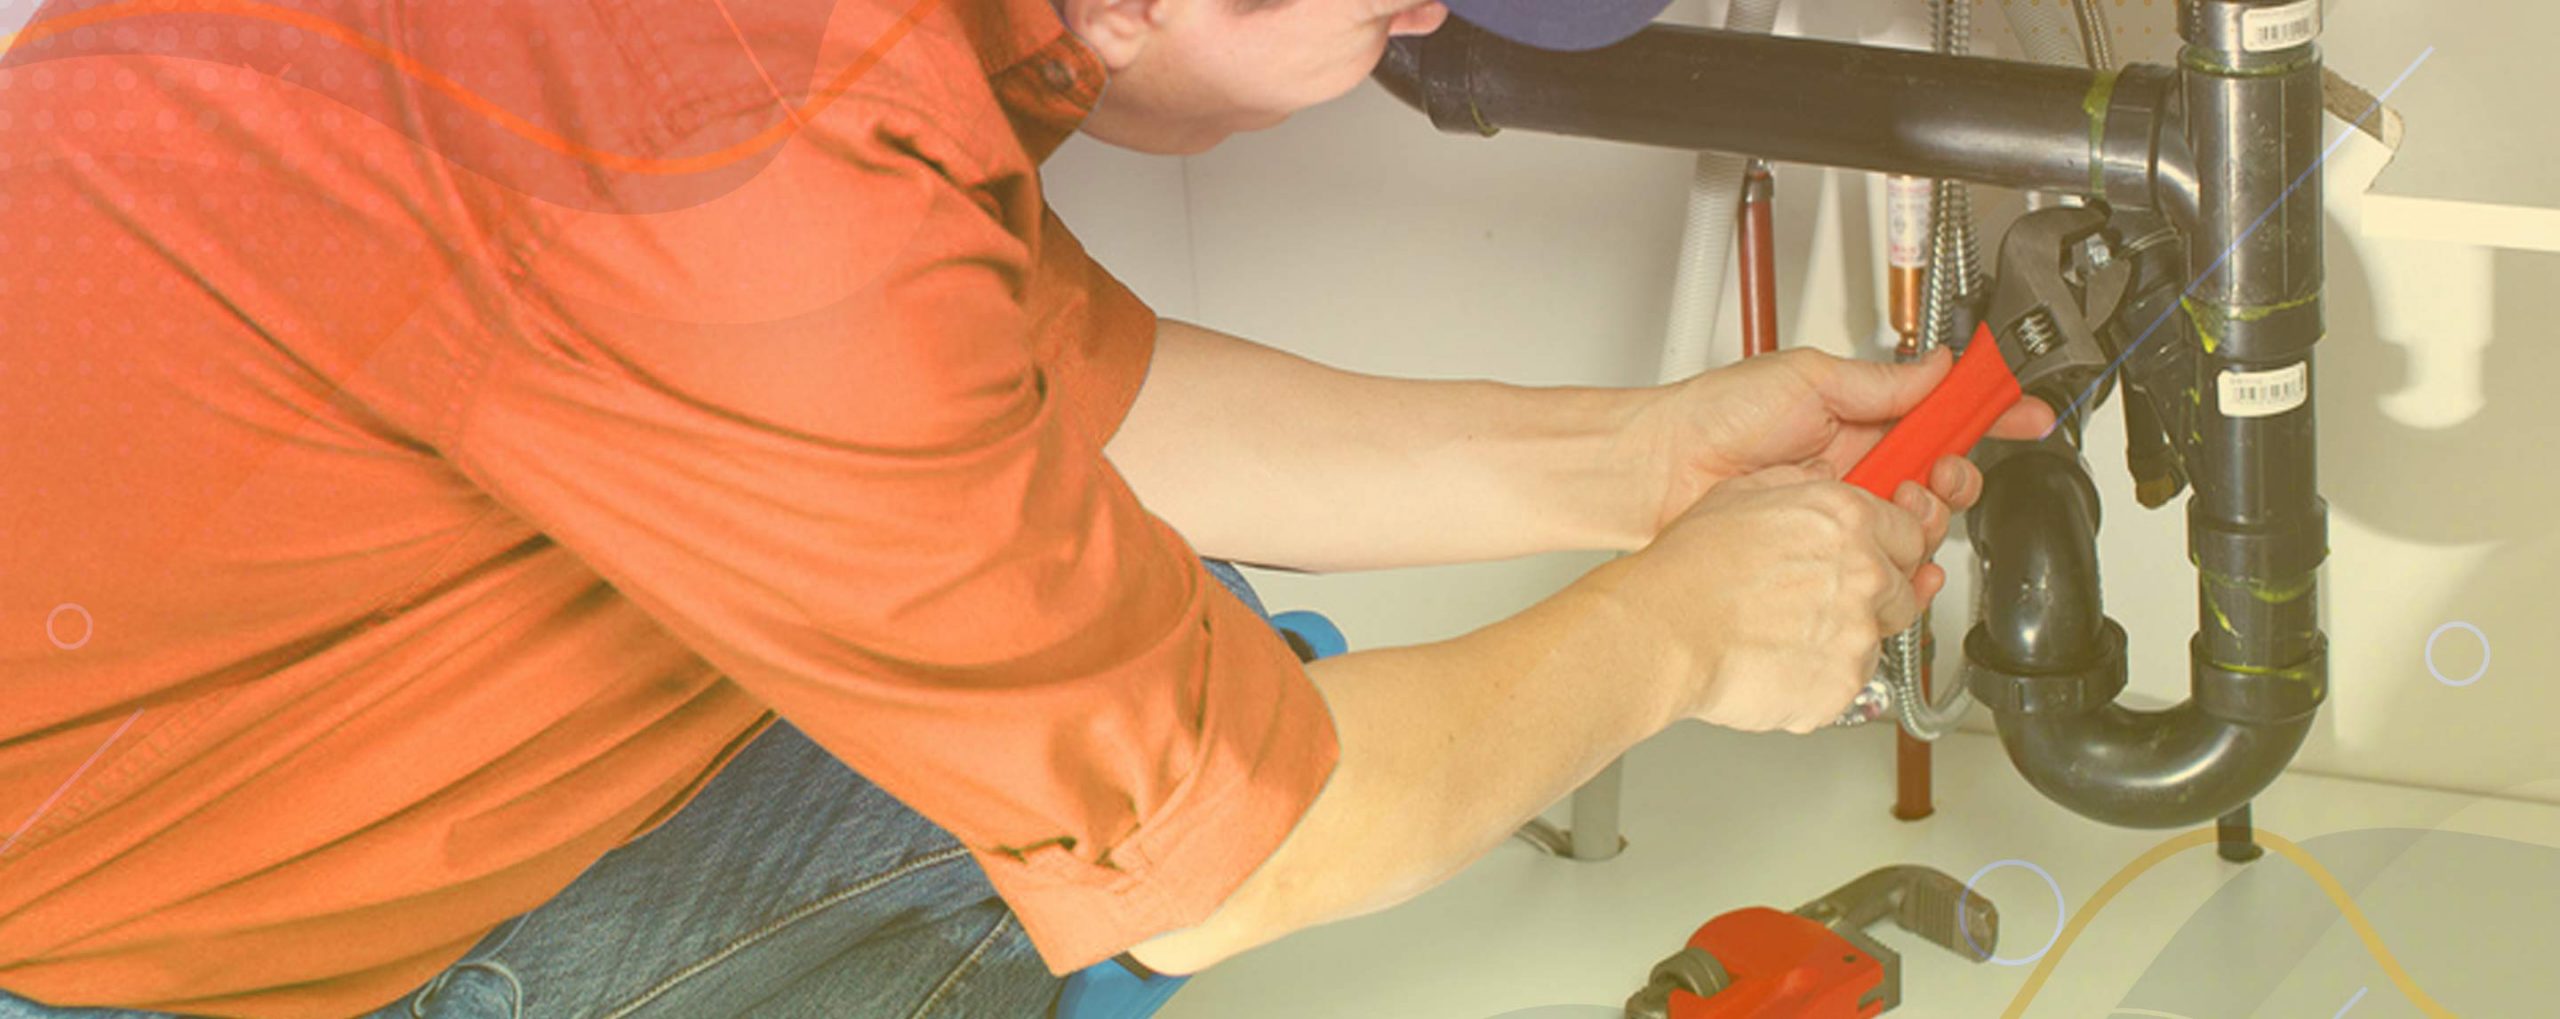 Handyman Services: The Solution To Your Home Repair Needs